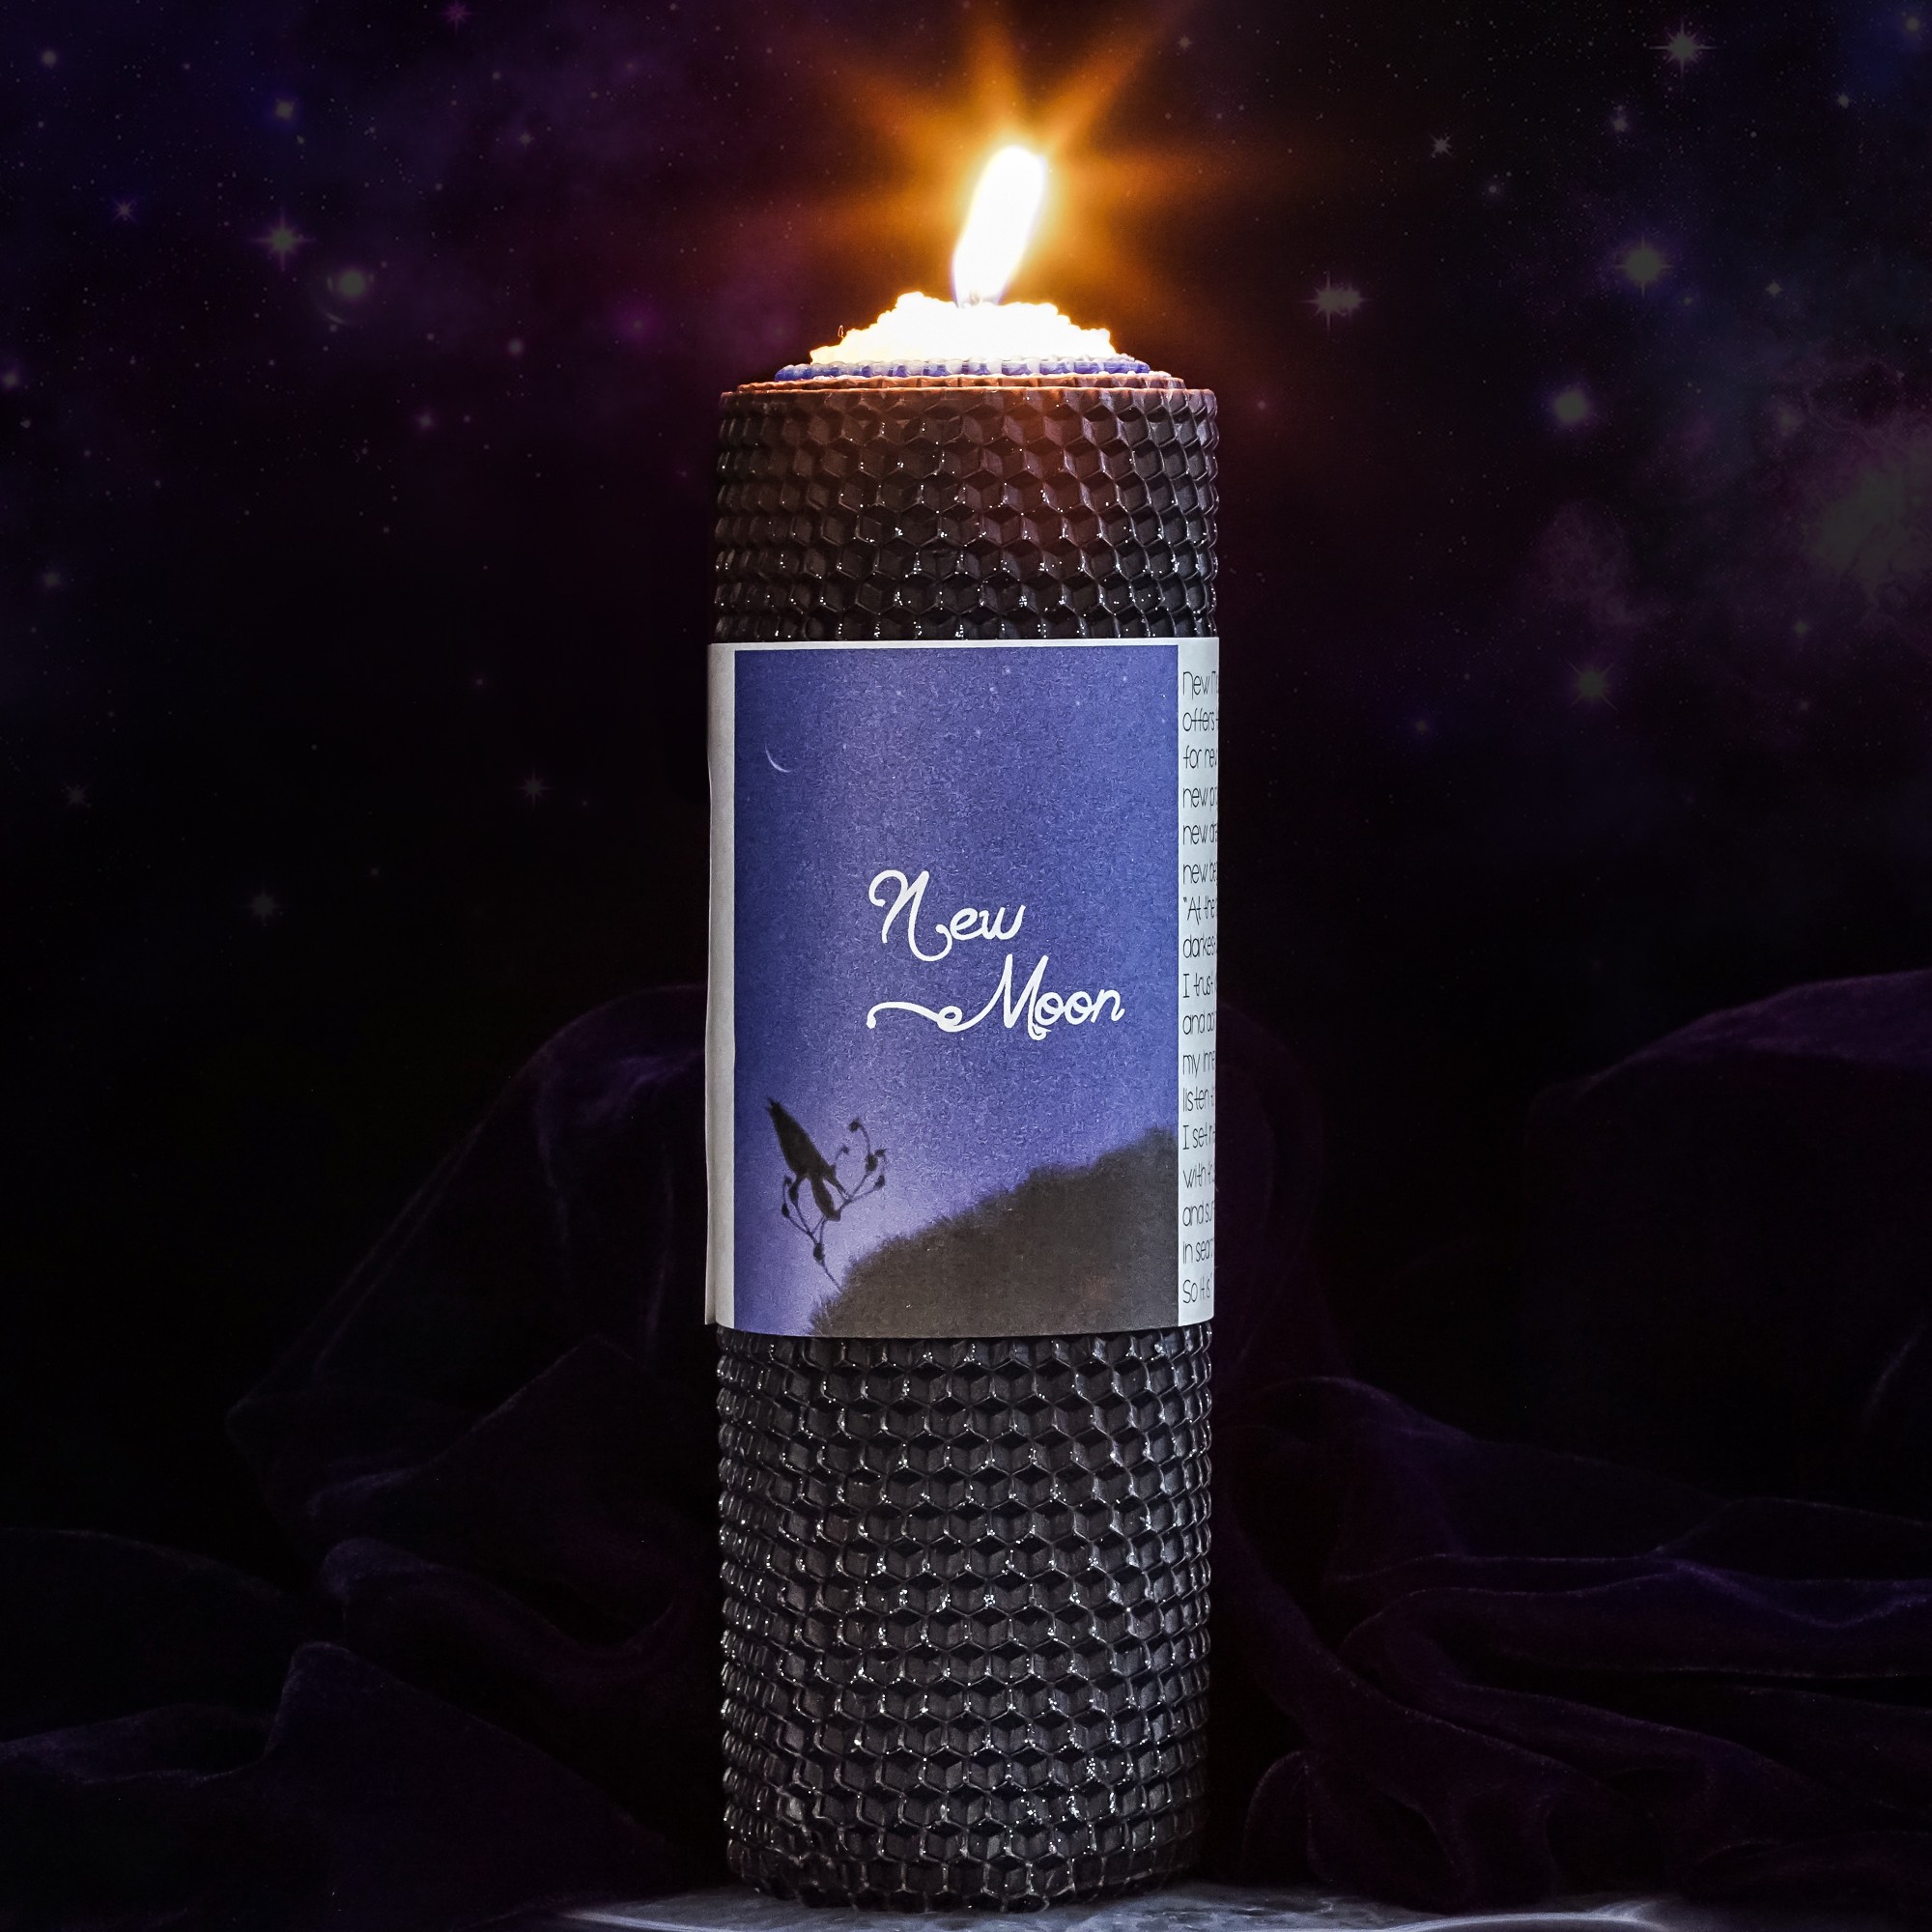 new moon candle